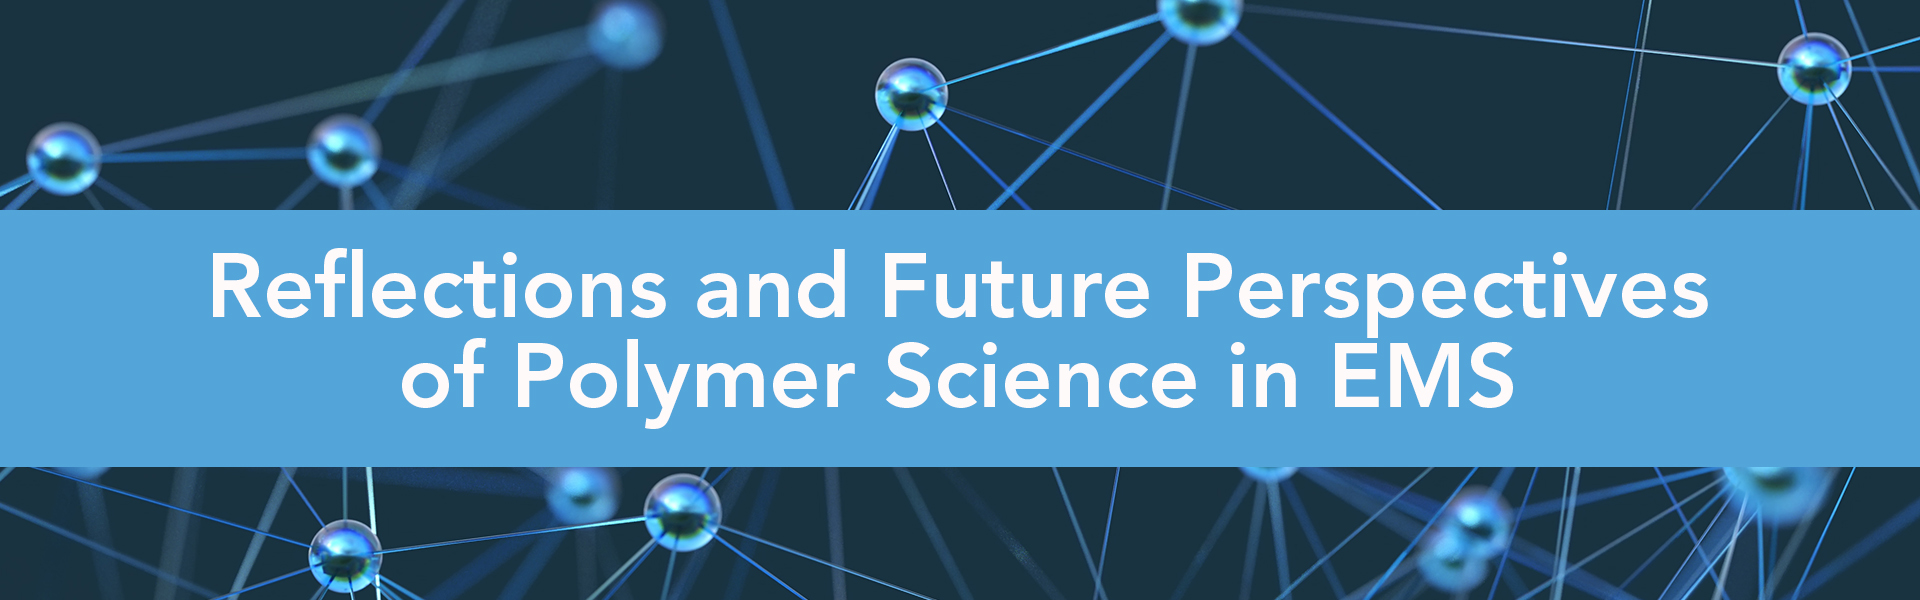 Reflections and Future Perspectives of Polymer Science in EMS